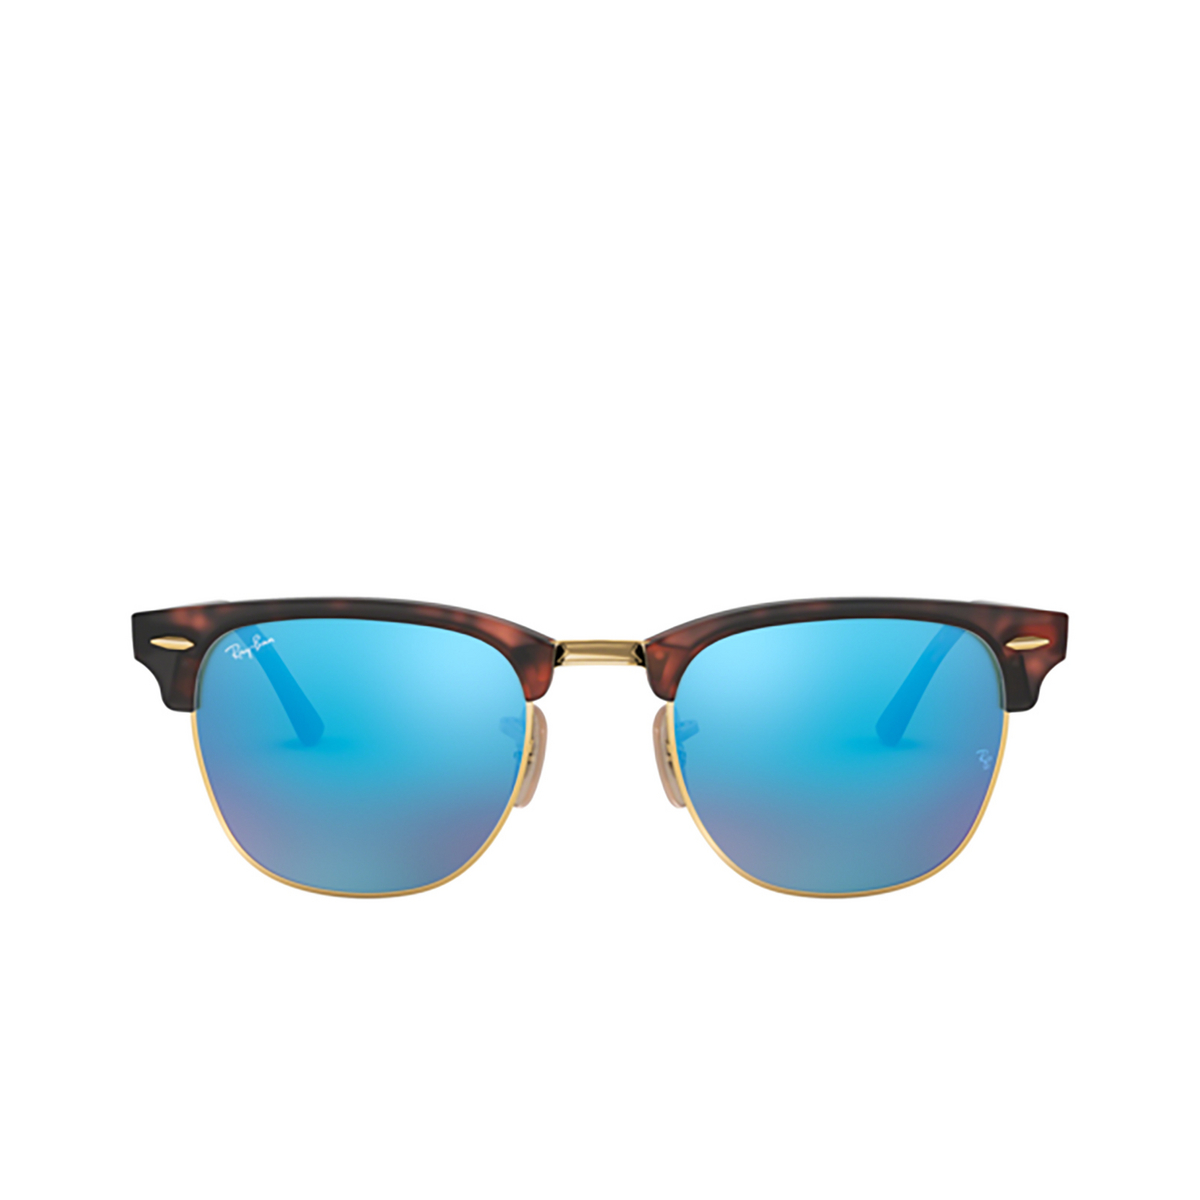 Ray-Ban CLUBMASTER Sunglasses 114517 SAND HAVANA ON ARISTA - front view